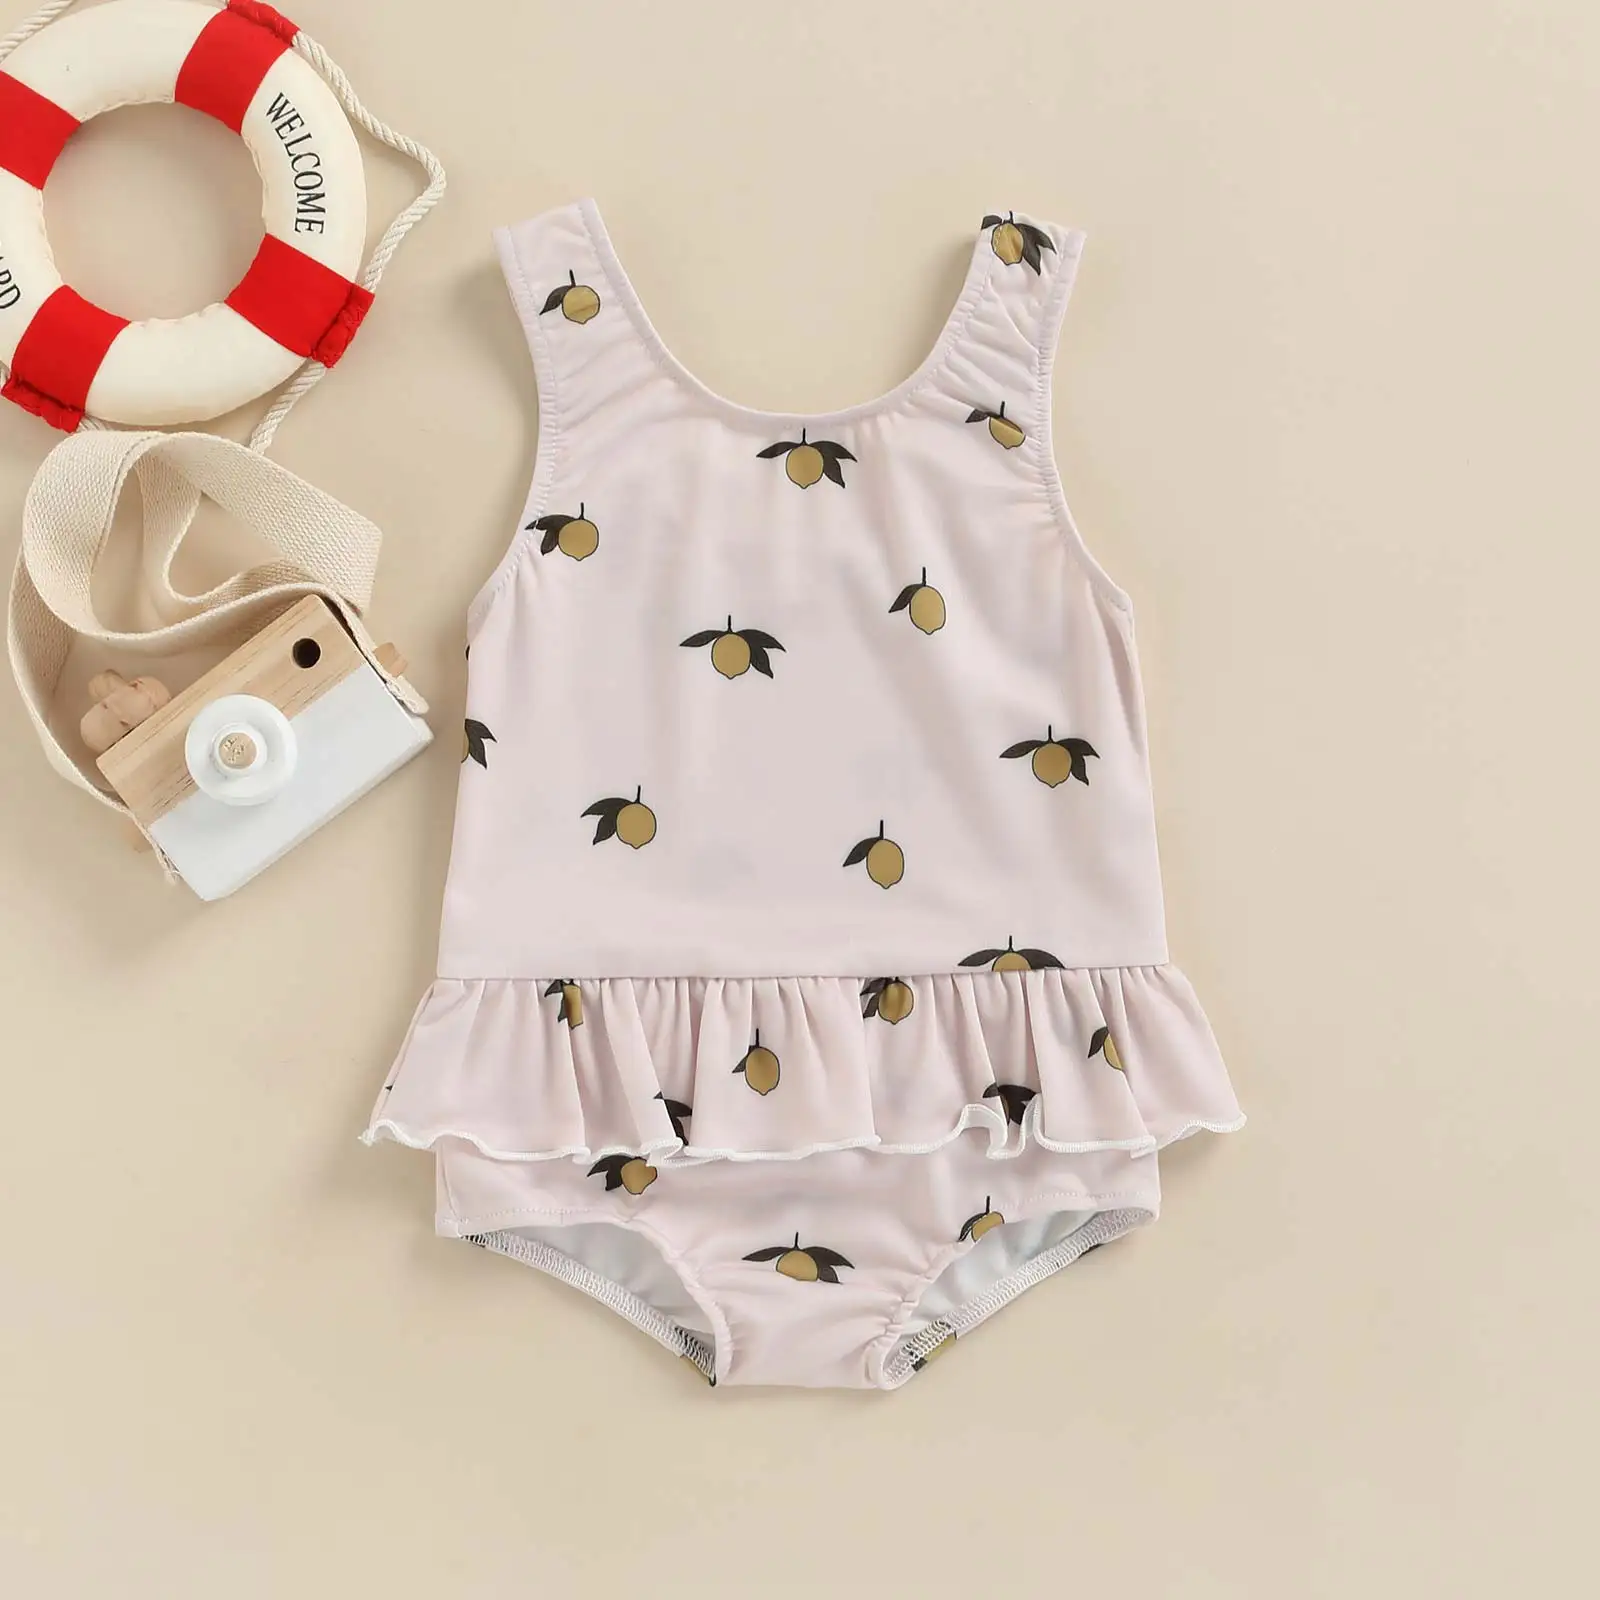 Infant Baby Girl Ruffled Swimwear, Bathing Sui Infant Stripe / Solid Color / Print Sleeveless Round Neck Bathing Suit 6M-3T Baby Bodysuits expensive